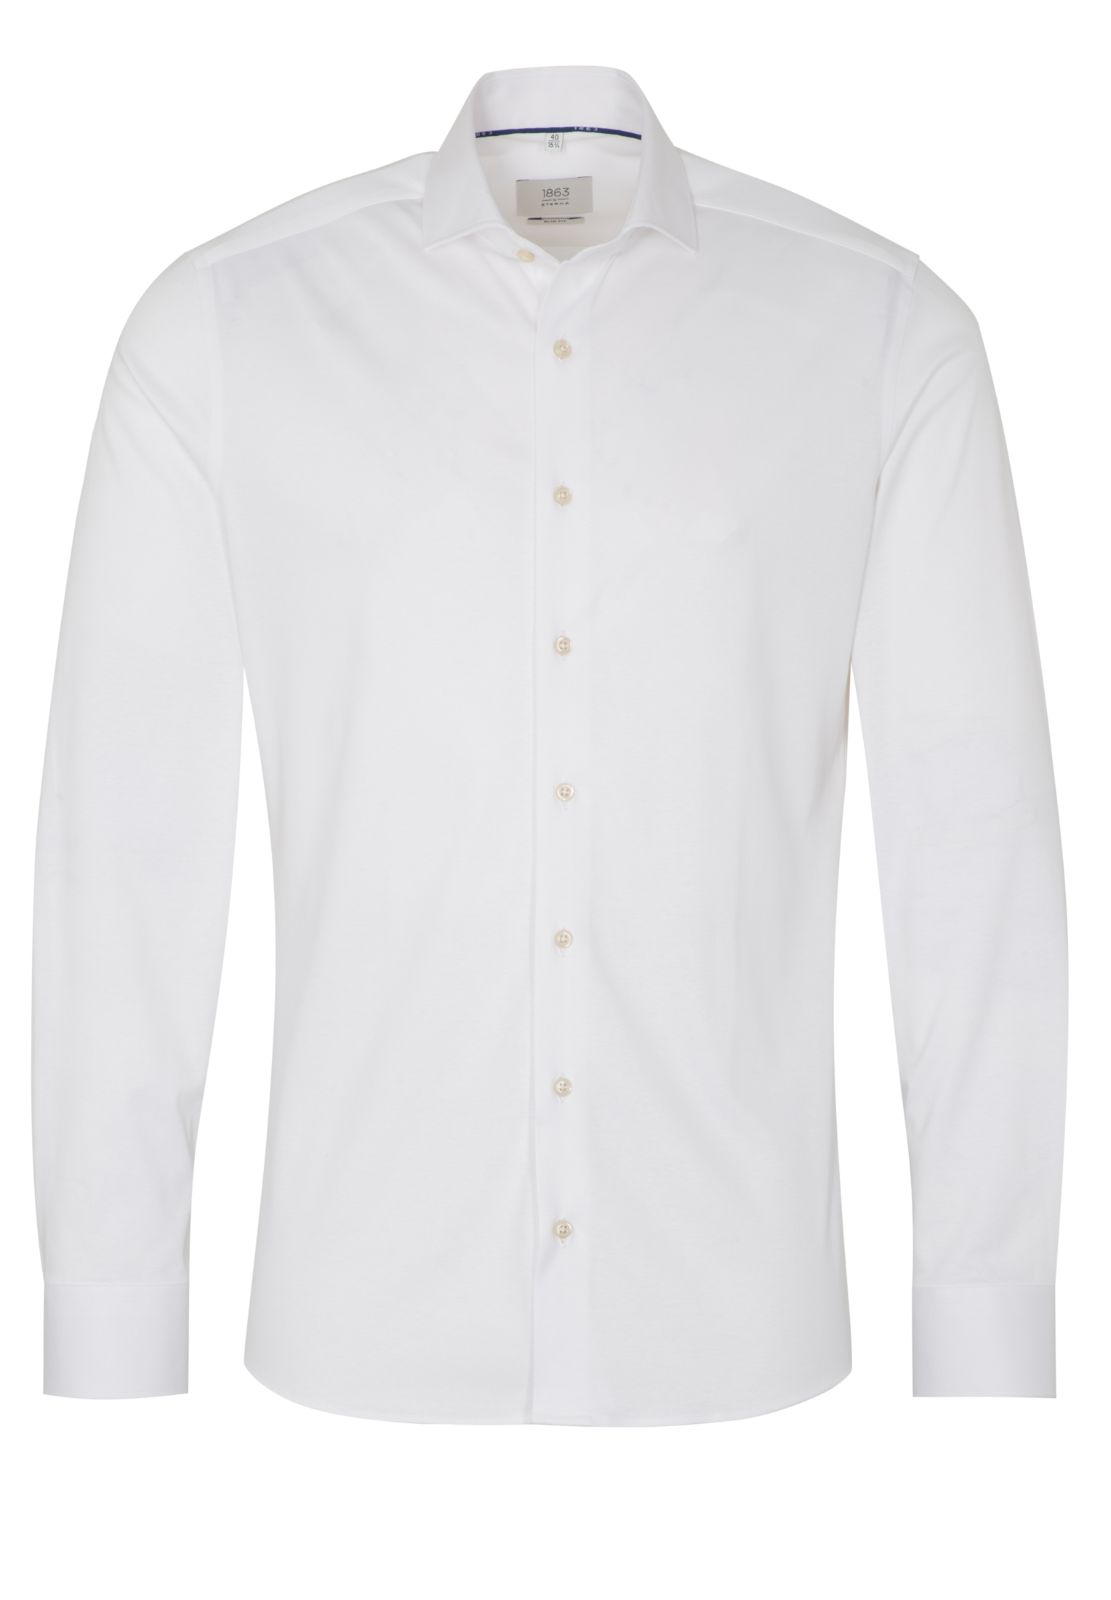 Soft Tailoring jersey slim fit shirt